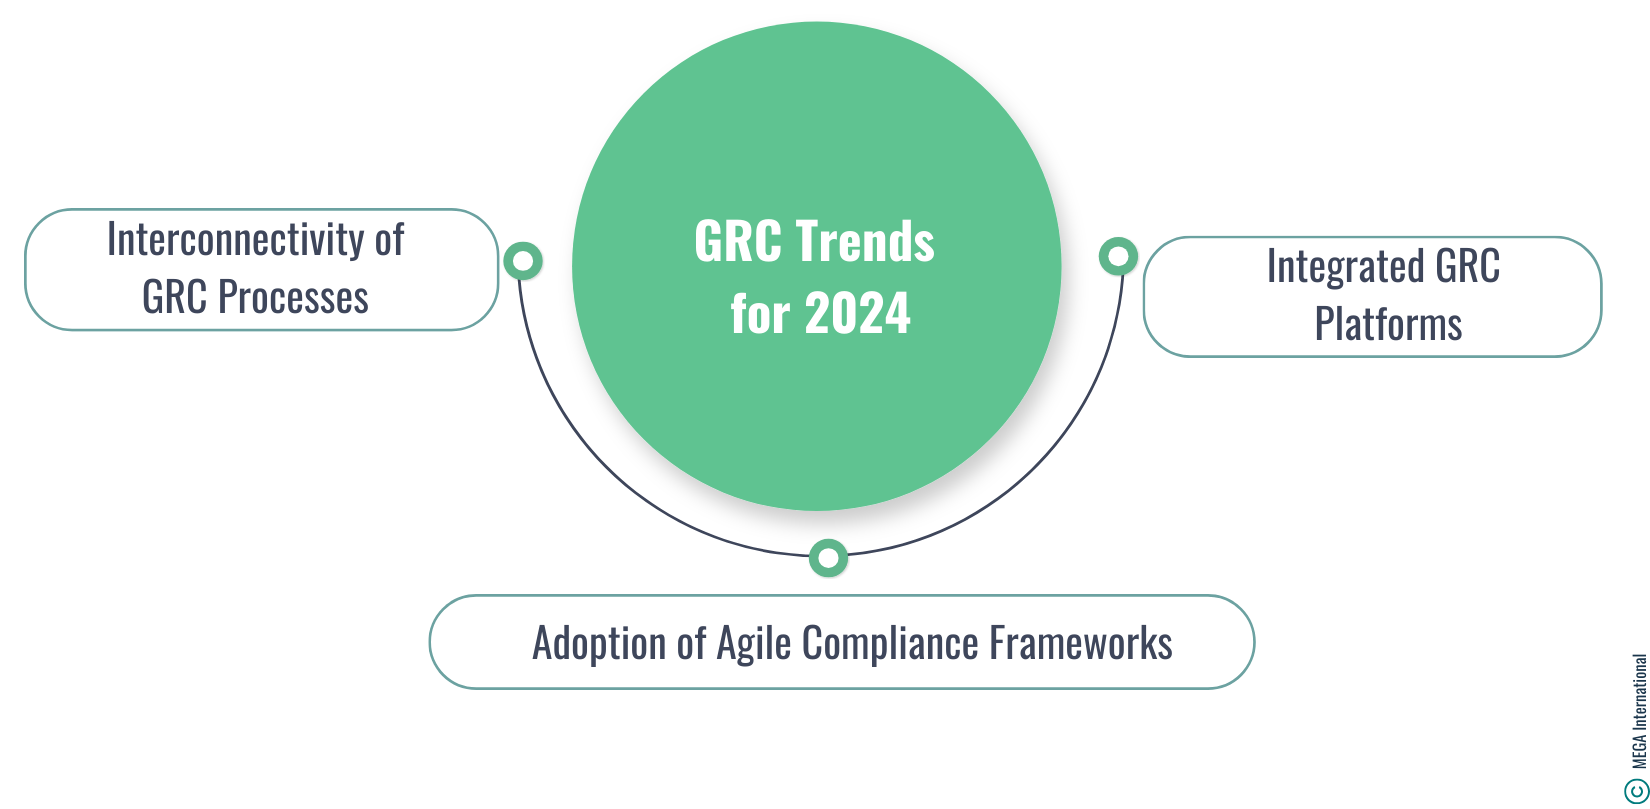 GRC Trends for 2024